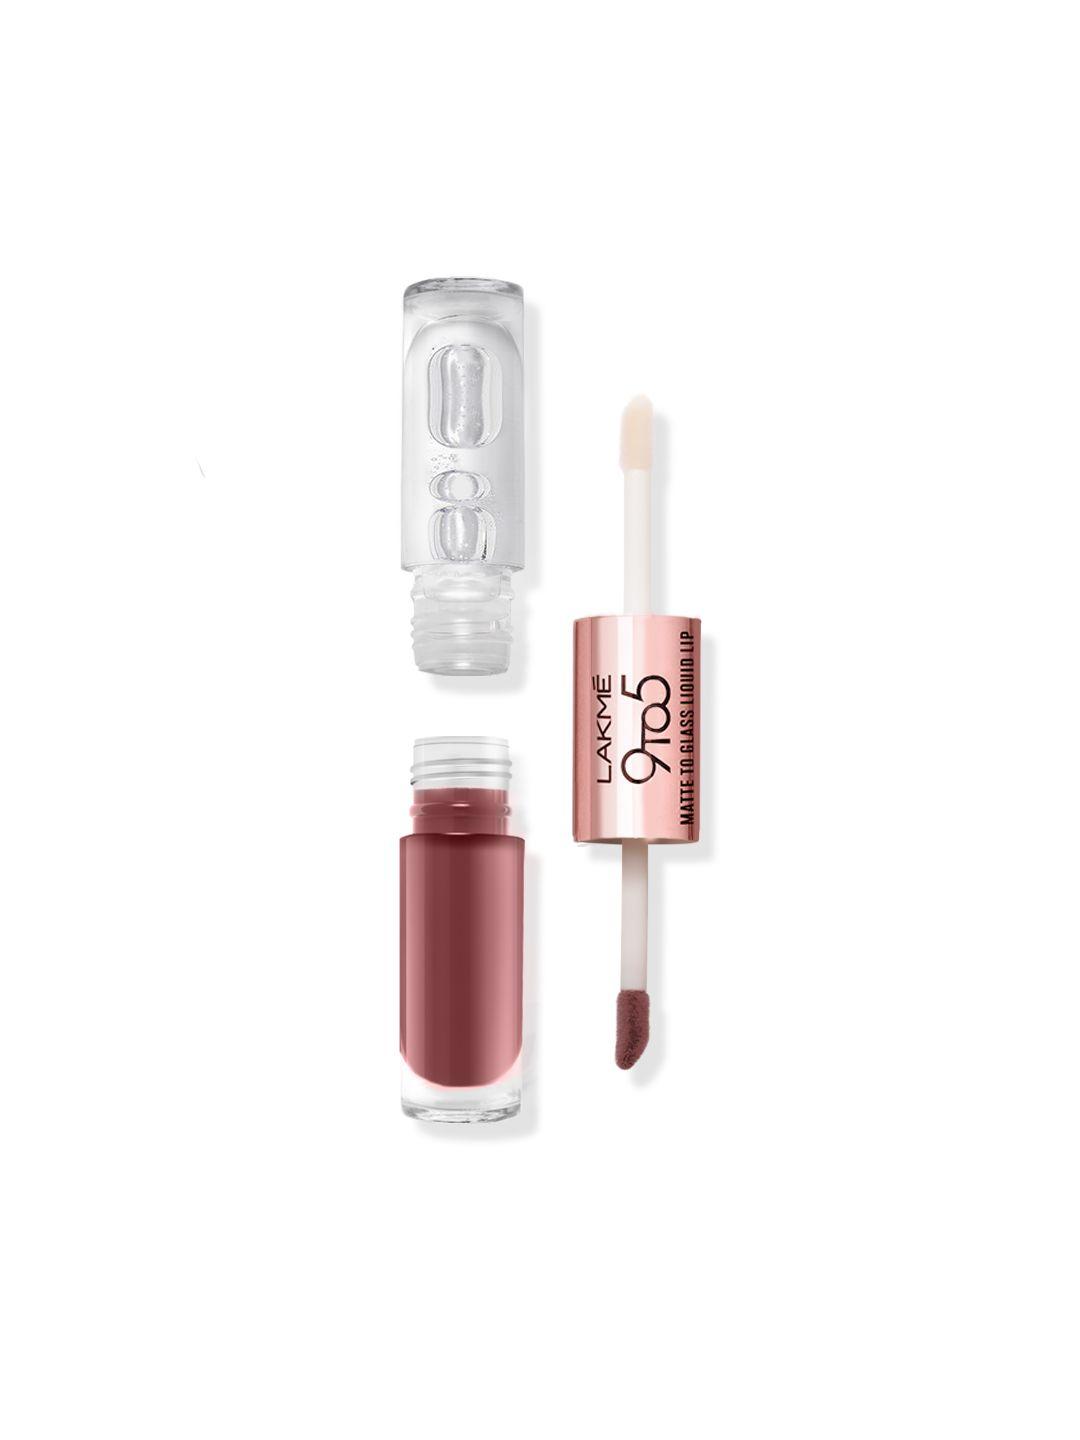 lakme 9to5 matte to glass transfer-proof liquid lip color 7.6ml - sweet praline